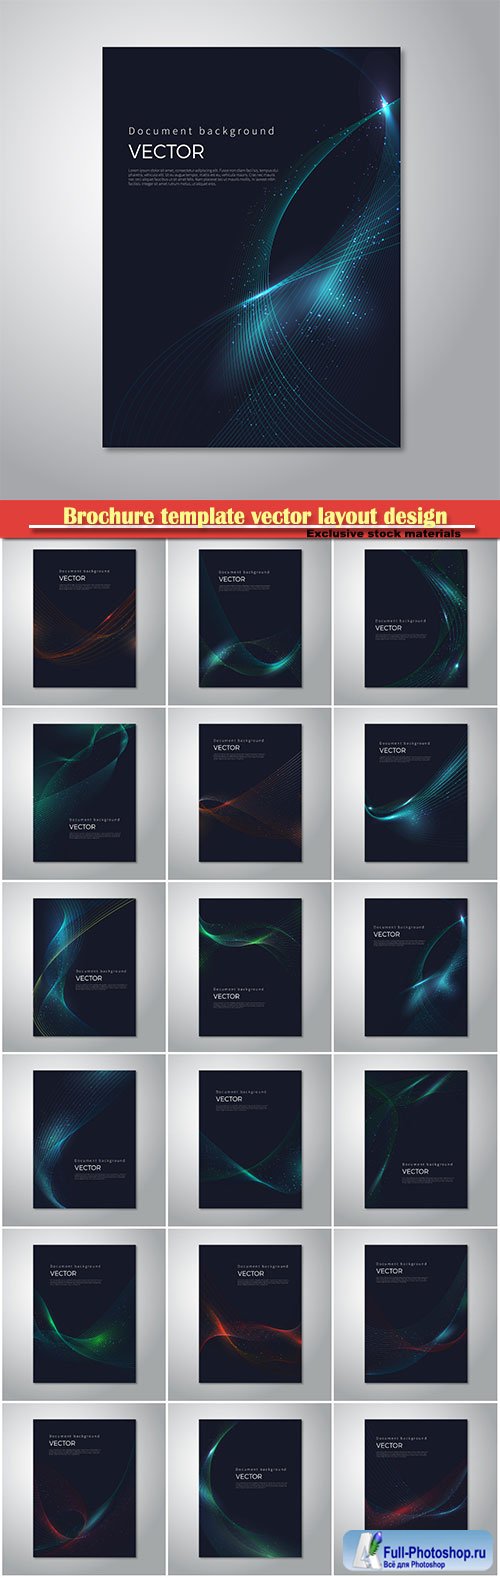 Brochure template vector layout design, abstract backgrounds